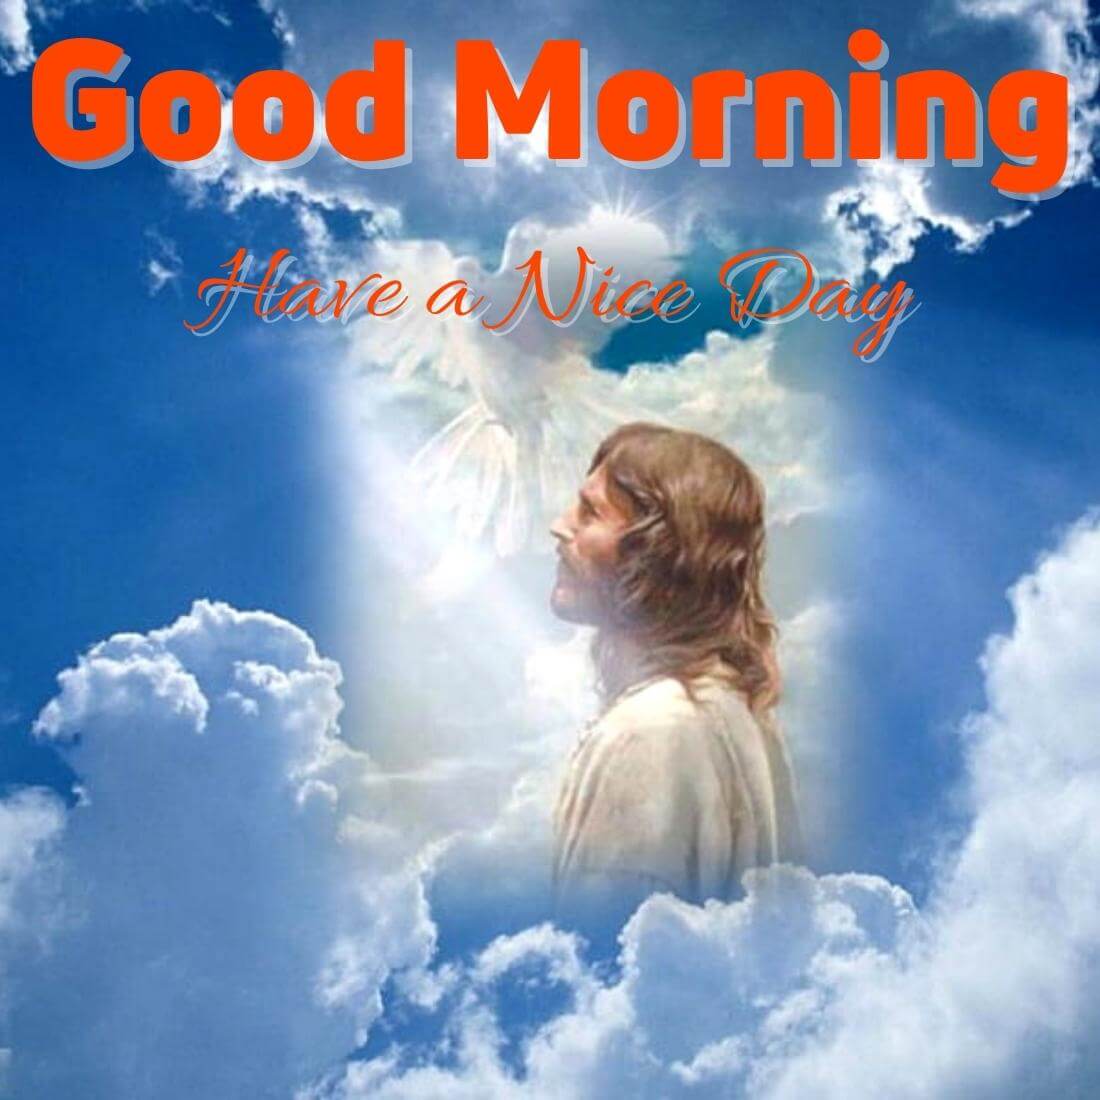 Free Lord Jesus good morning pics for Friend